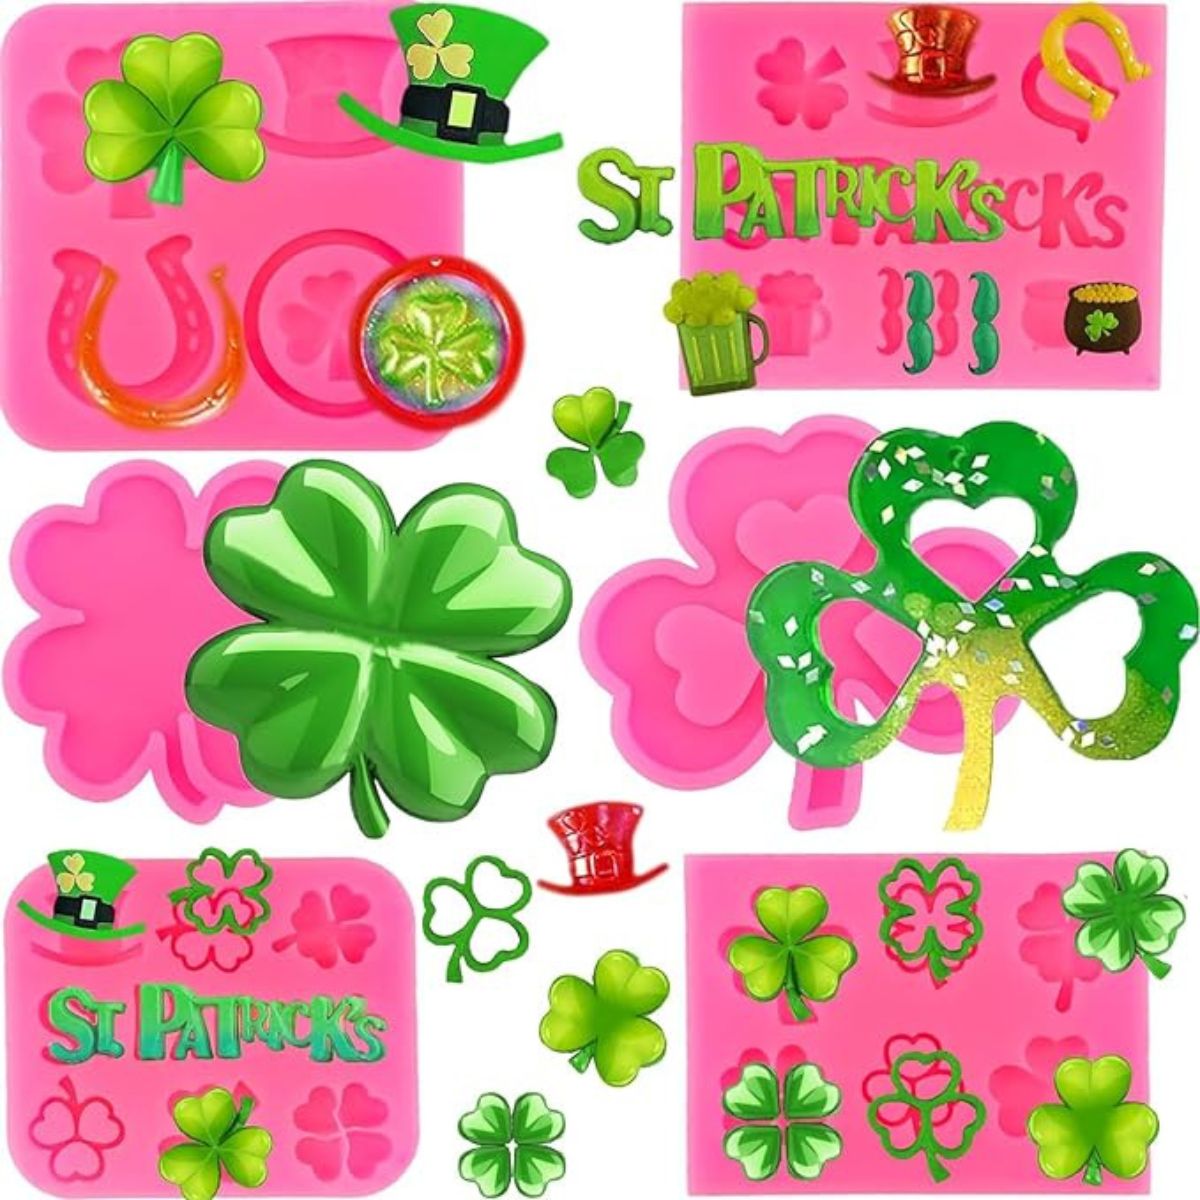 Multi-functional St. Patrick&#x27;s Day Silicone Molds